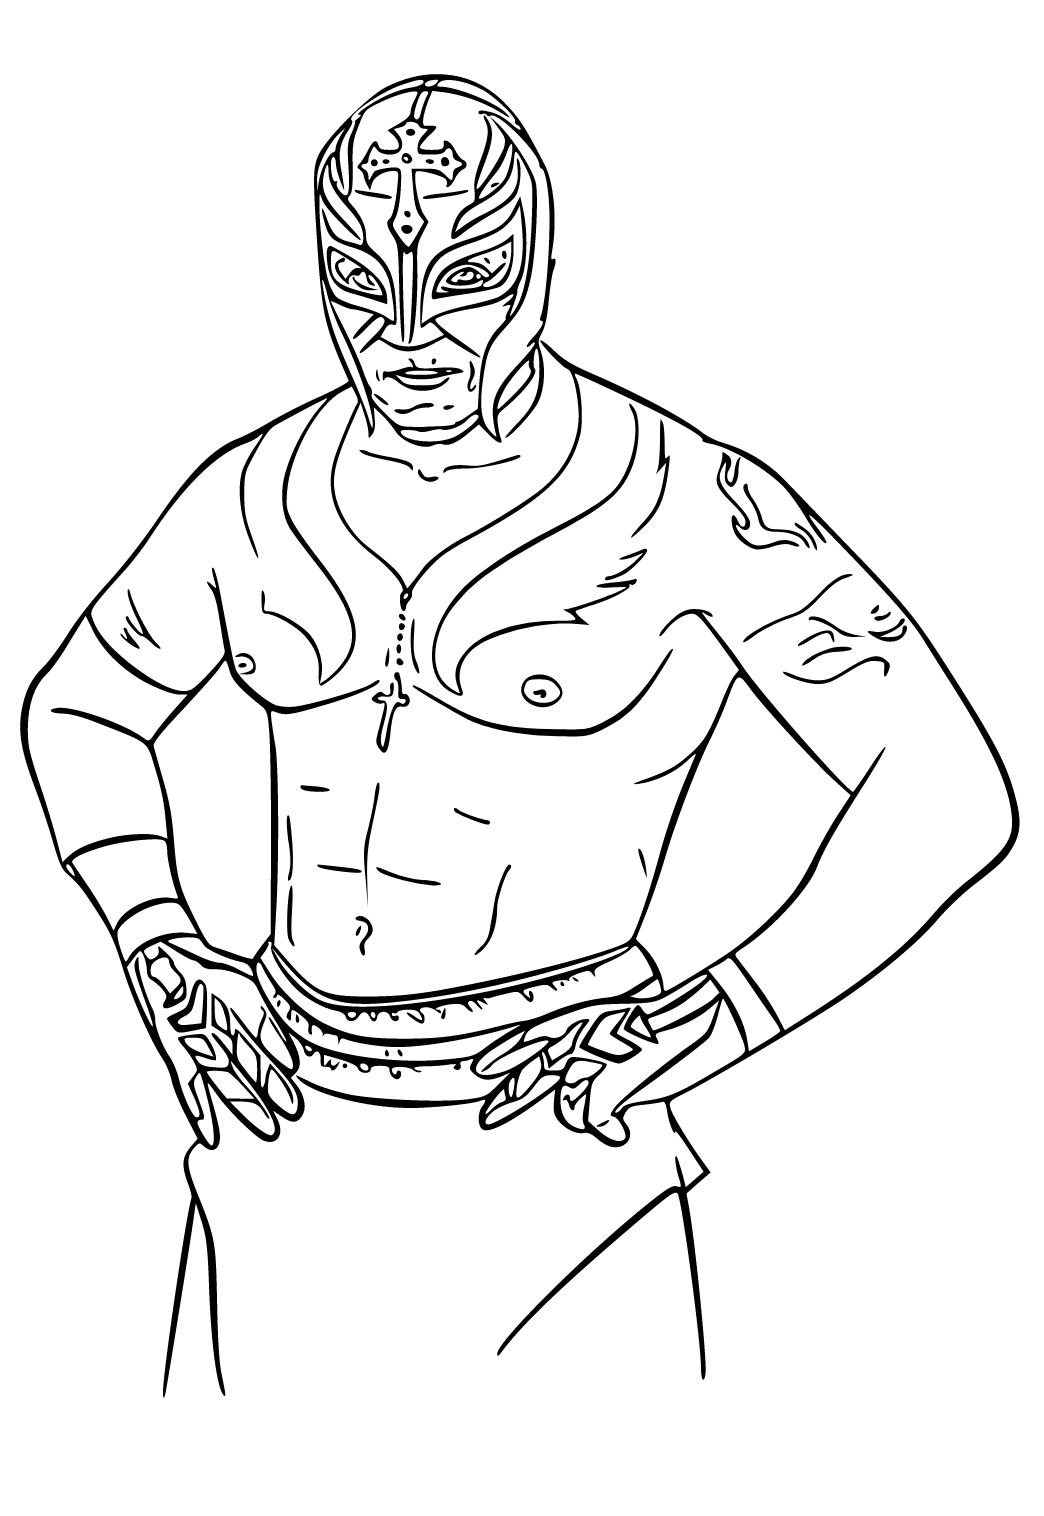 Free printable wwe mask coloring page for adults and kids